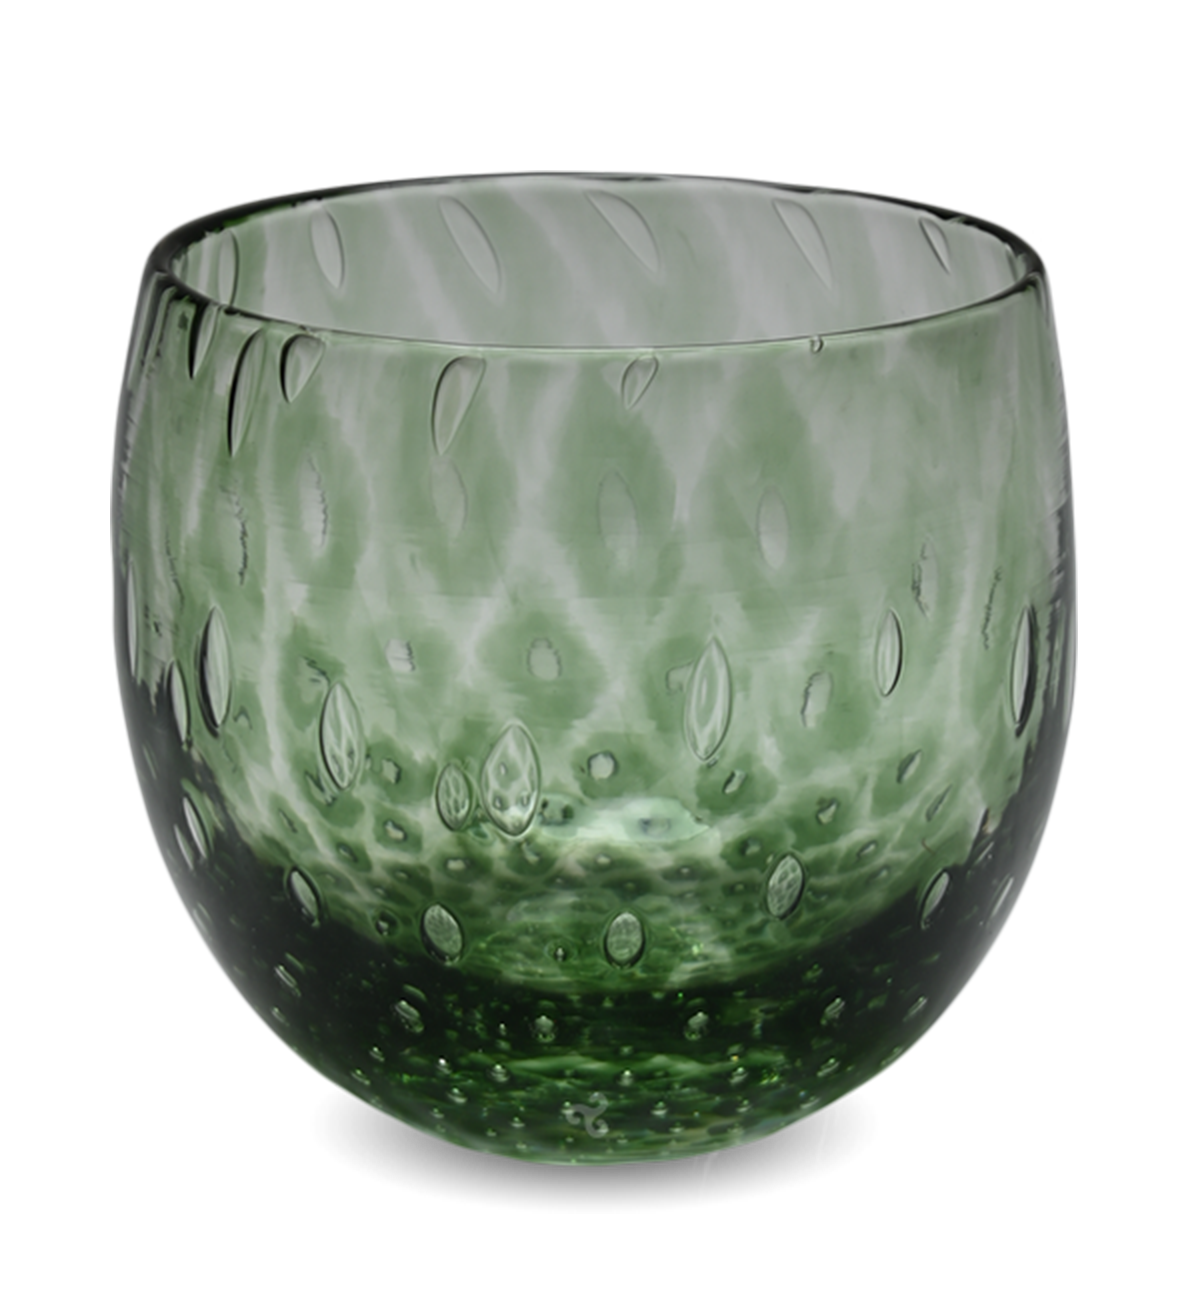 infusion is a dark green hand-blown drinking glass with a bubble pattern.